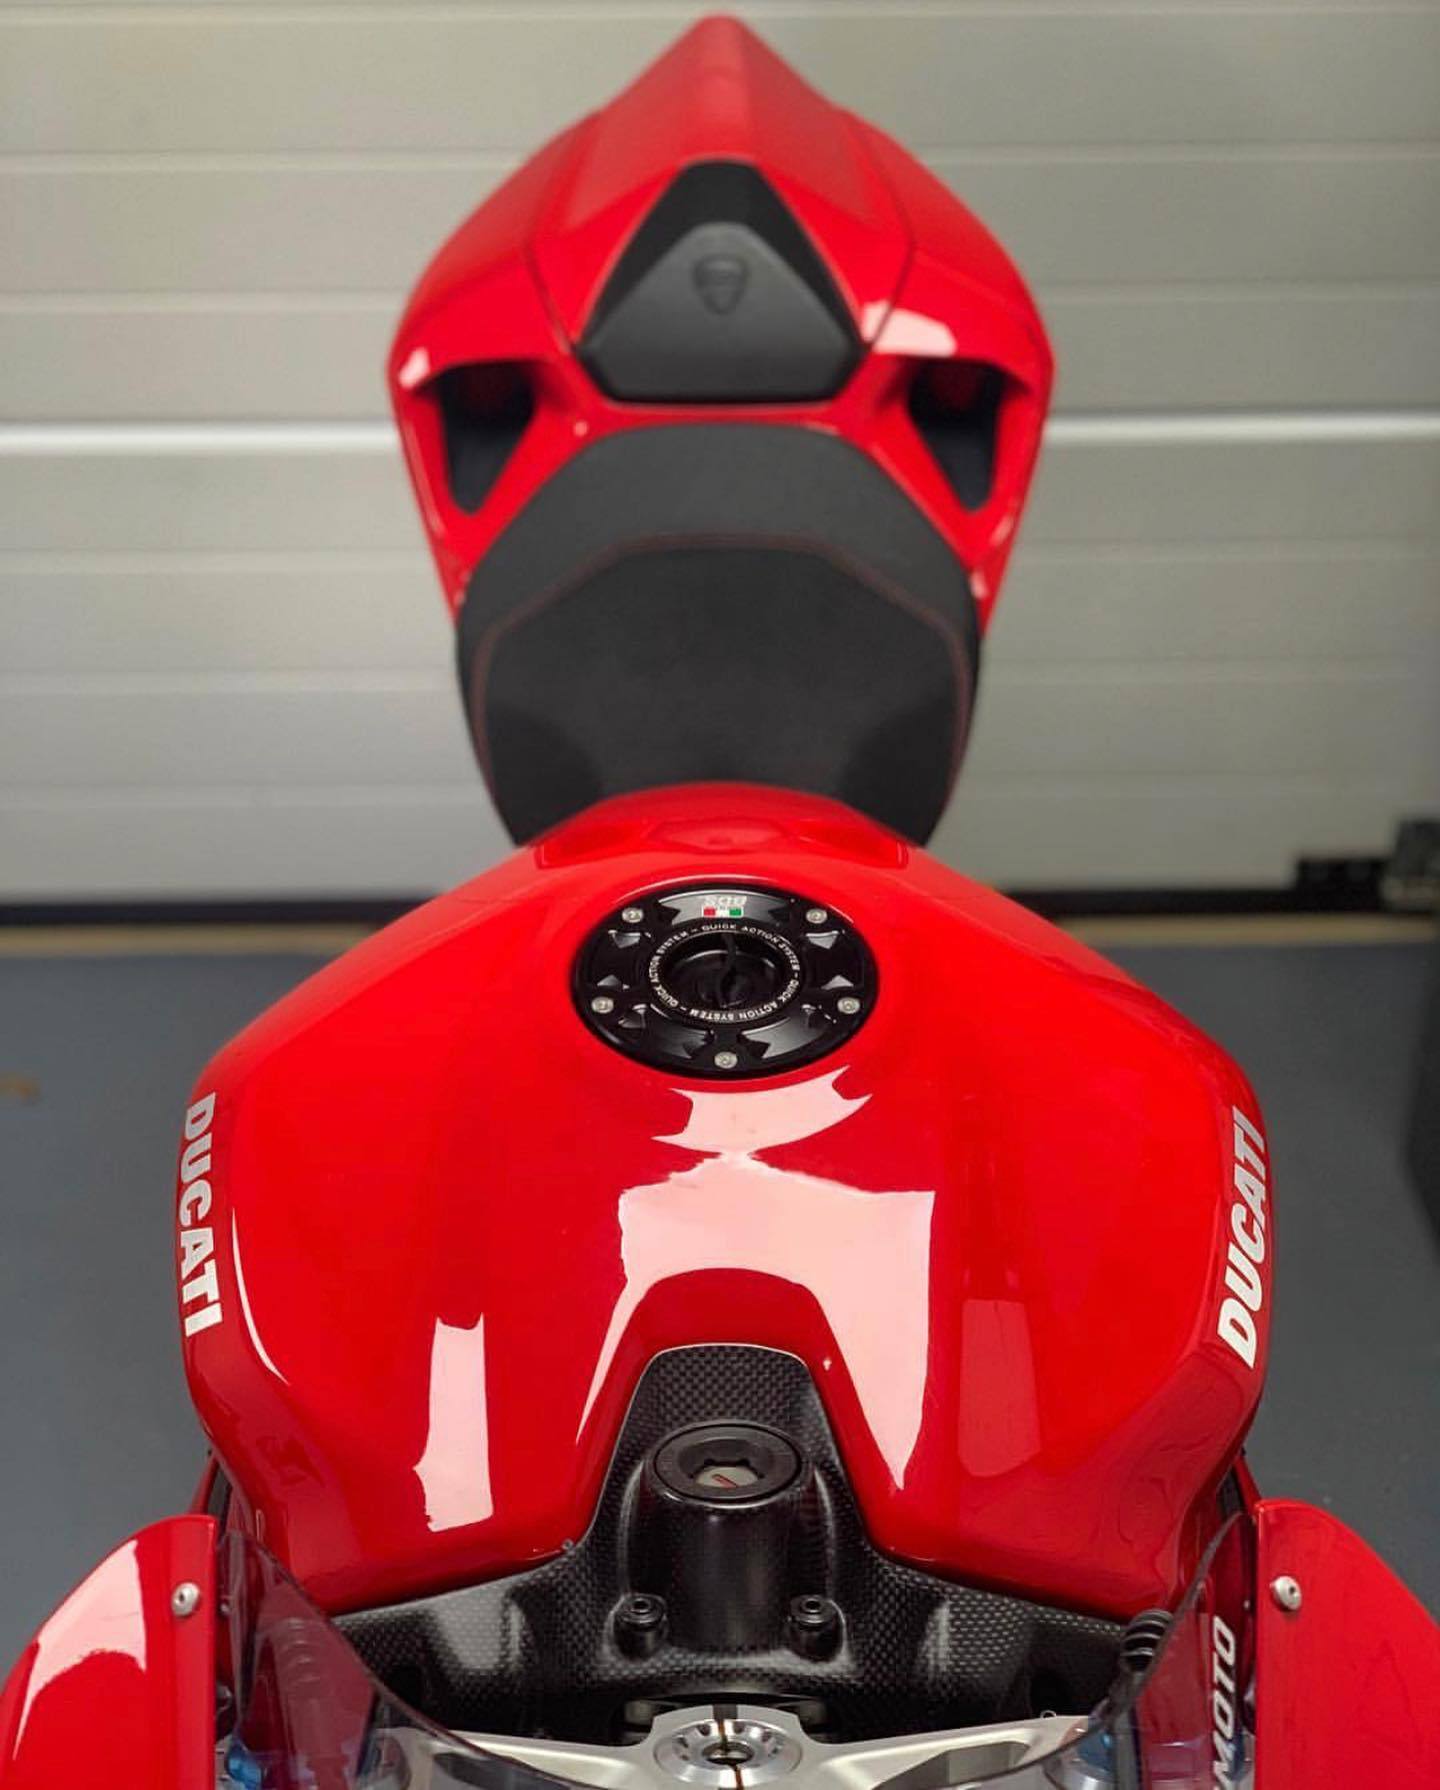 2018-2023 Ducati Panigale V4 Quick Action Fuel Cap by TWM